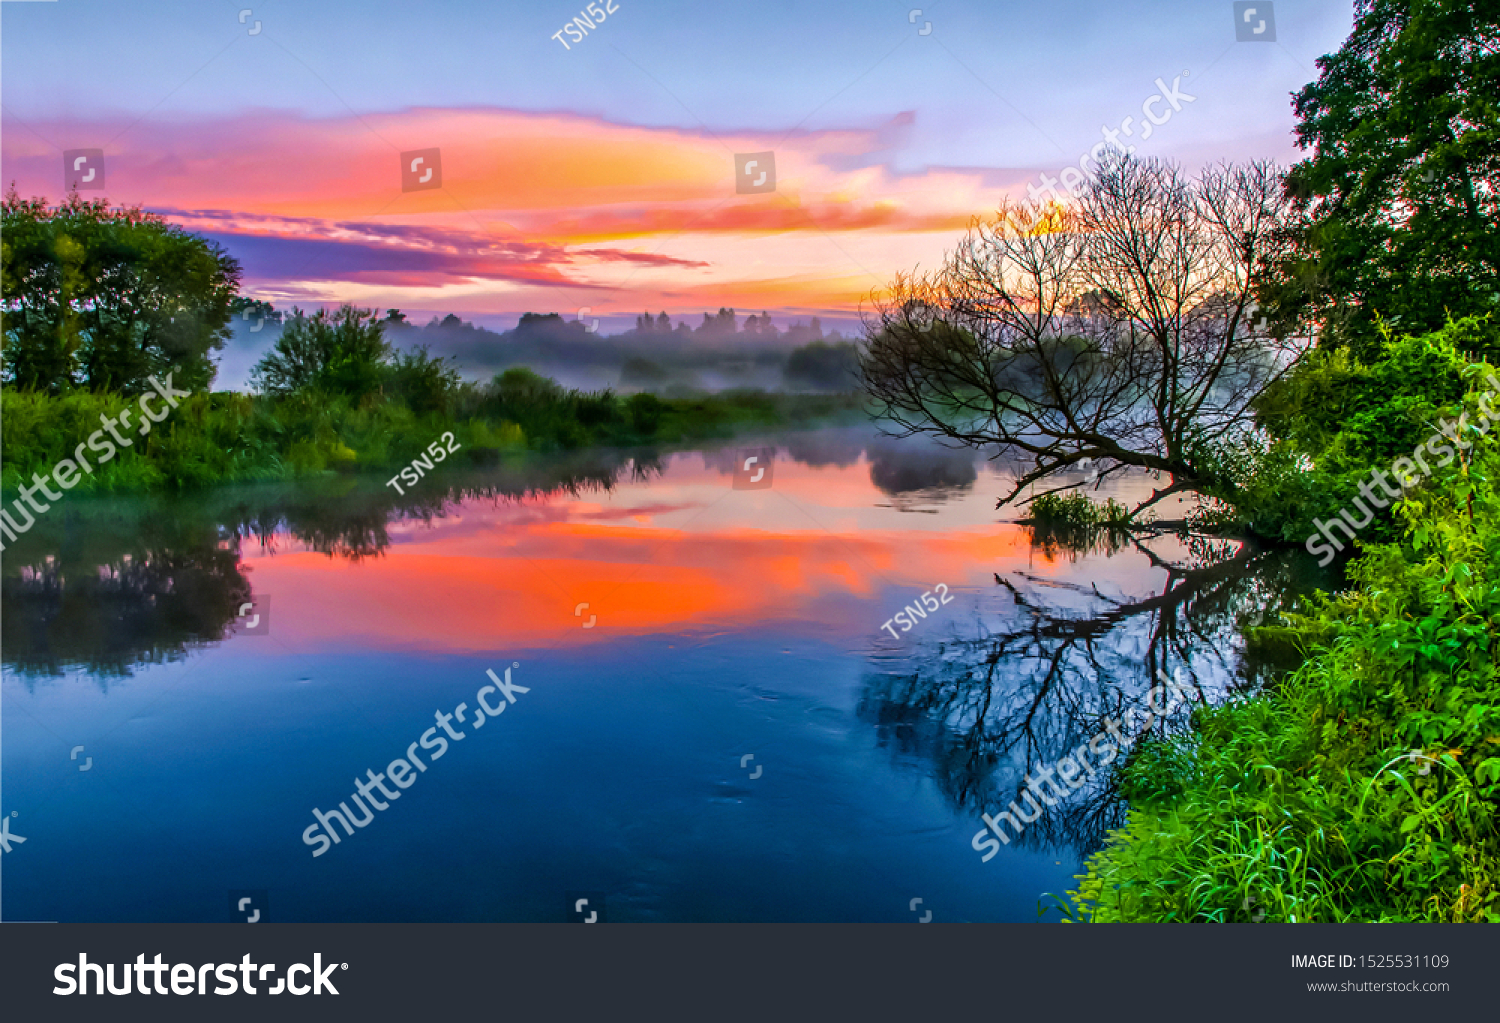 River water in beautiful sunset fog landscape view #1525531109